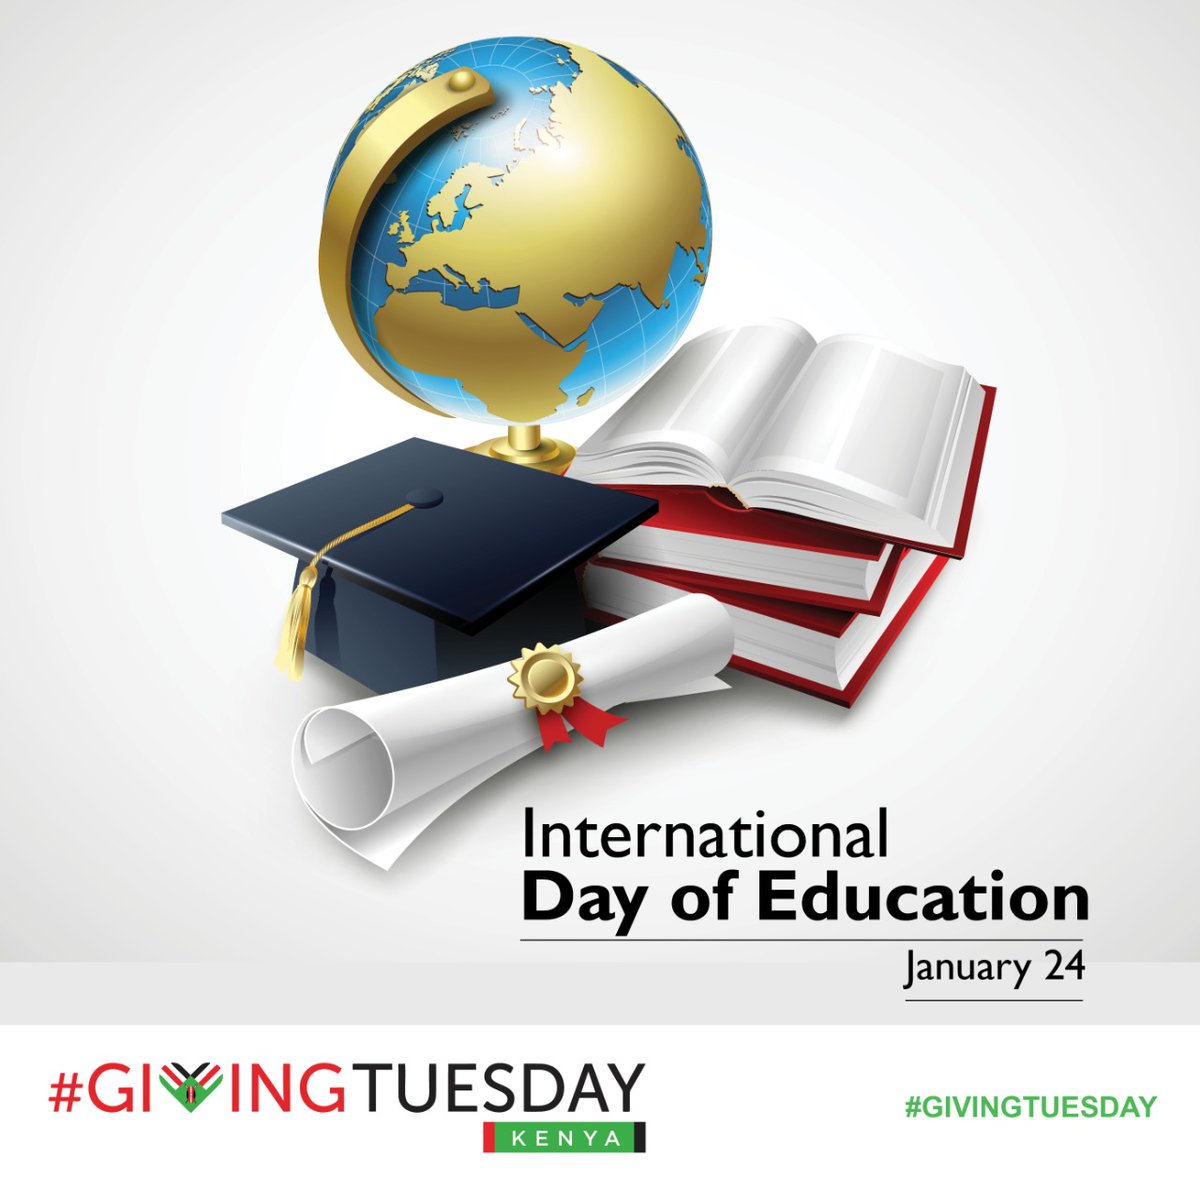 In celebration of #WorldEducationDay we echo the sentiments of Nelson Mandela when said 'education is the most powerful weapon we can use to change the world'
We celebrate those  working to transform education systems & create better opp for all to learn. #GivingTuesdayKe